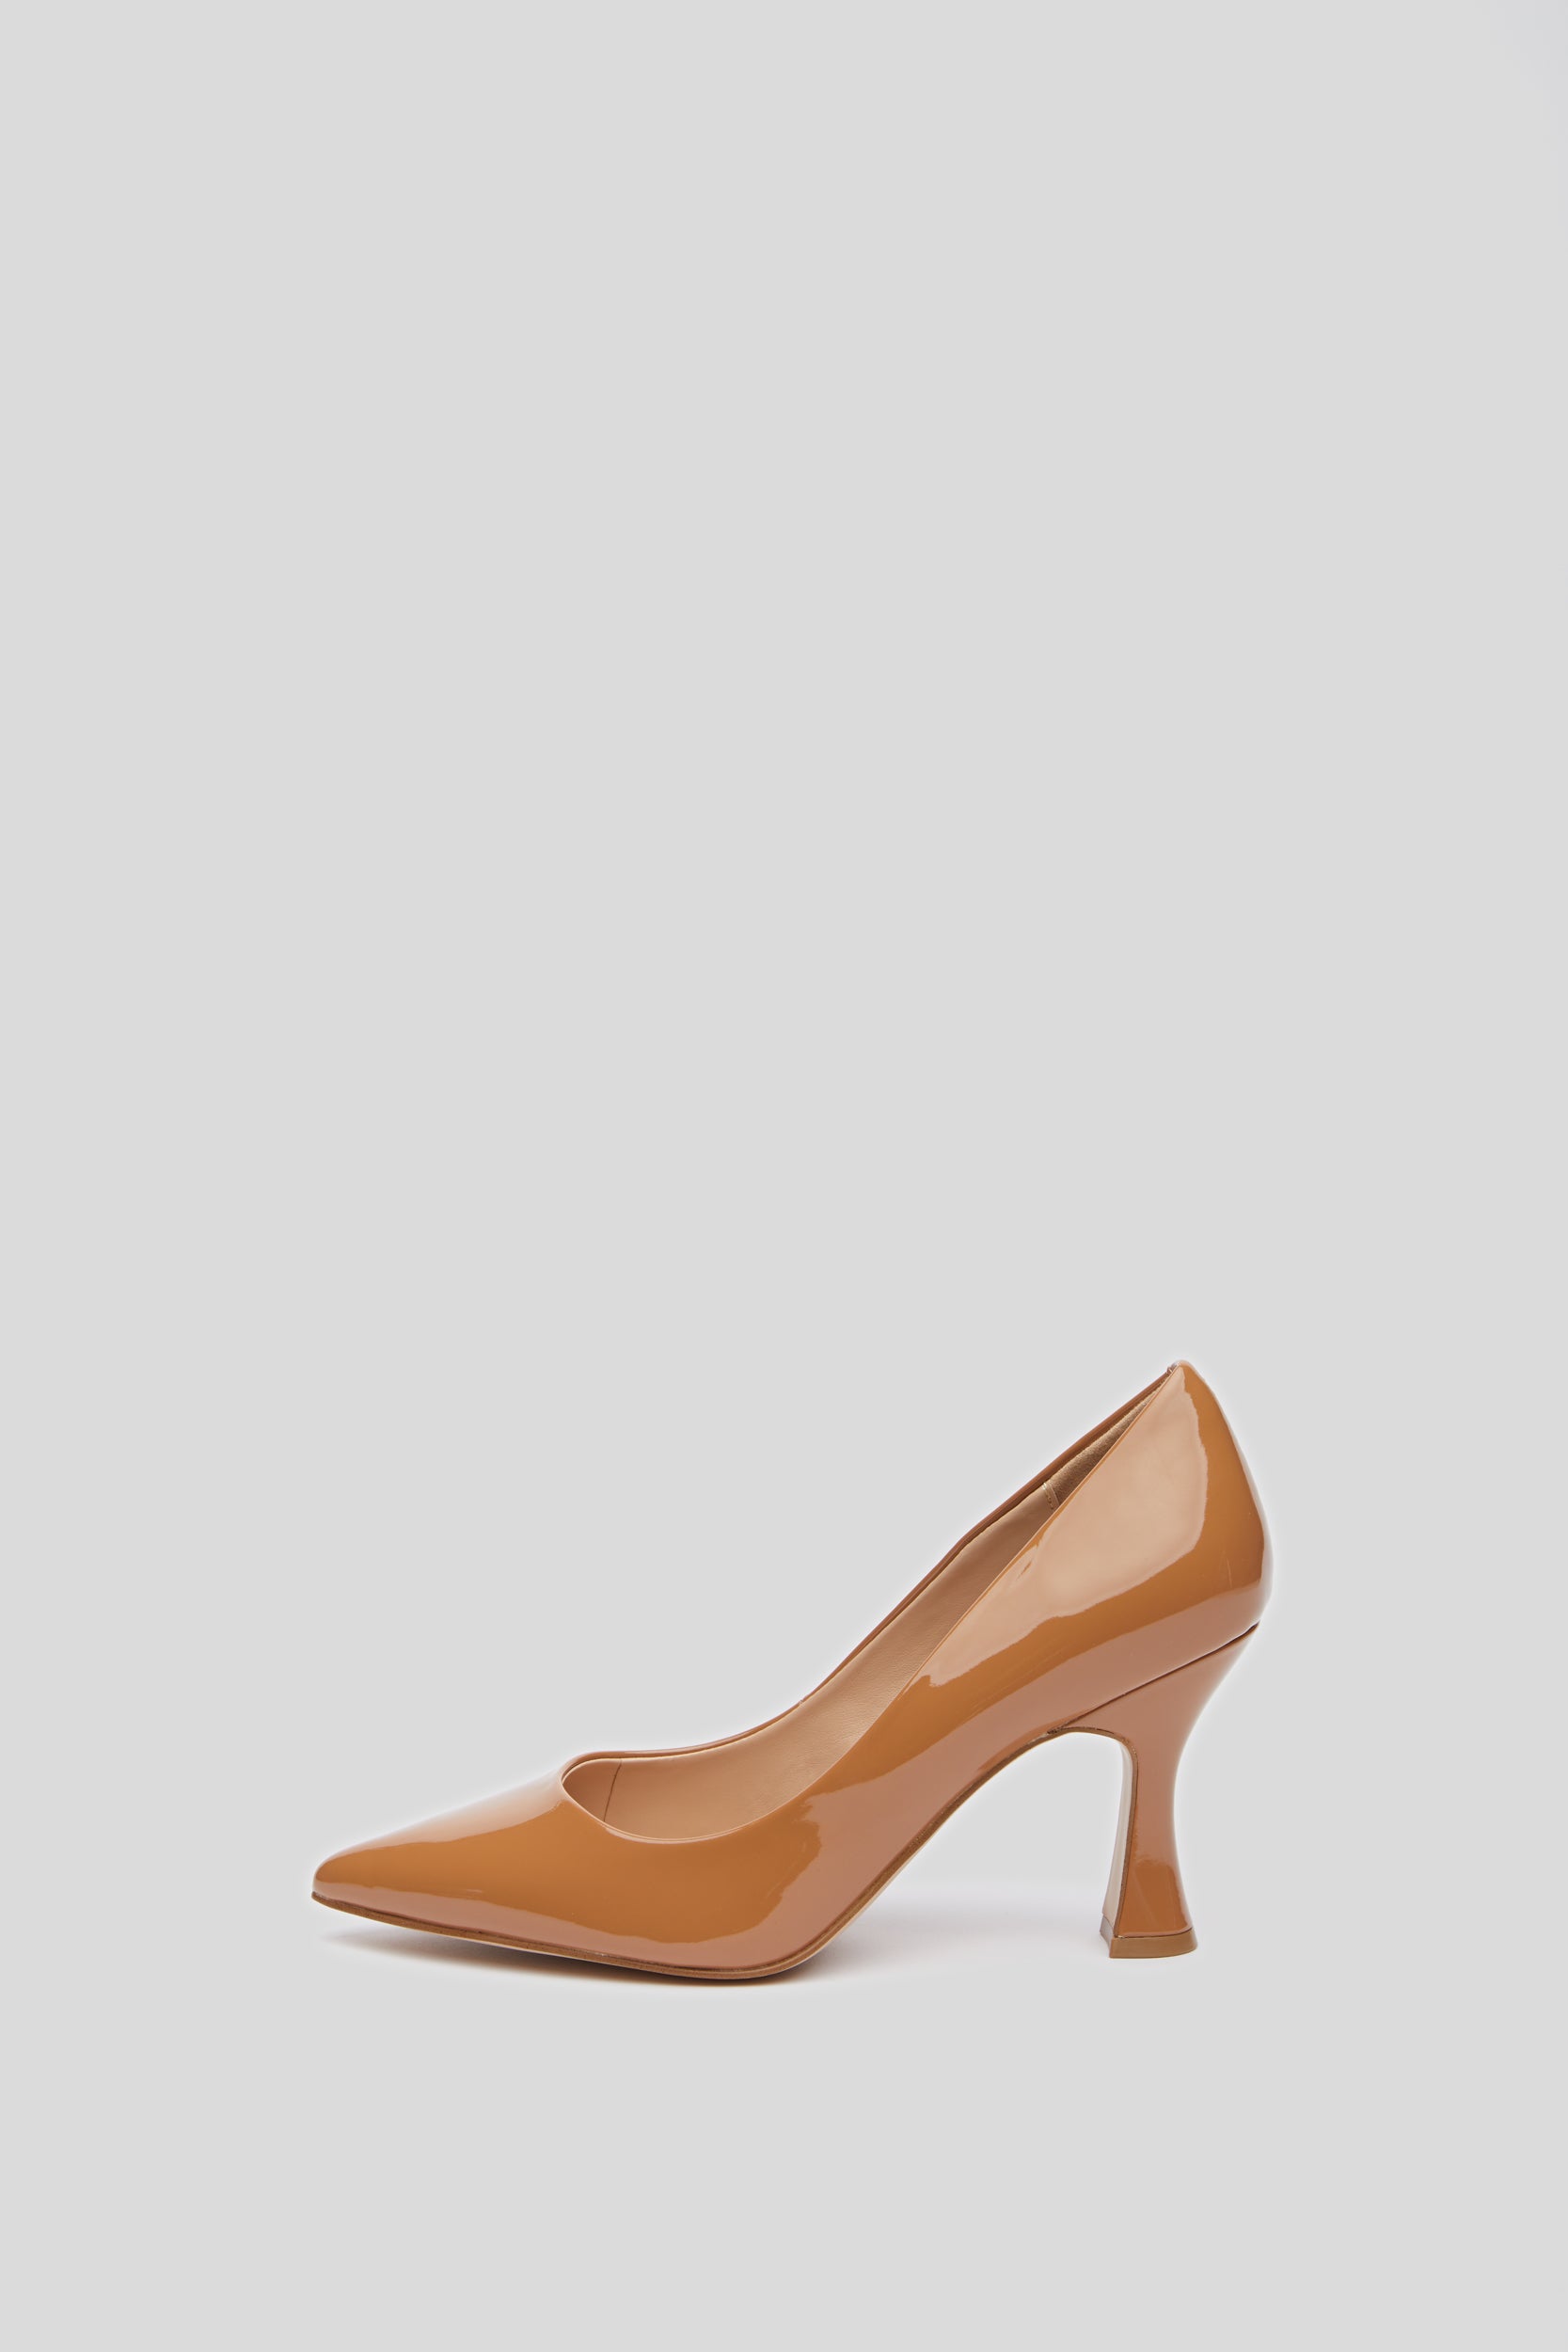 STEVE MADDEN "Notary" Décolleté in Camel Patent